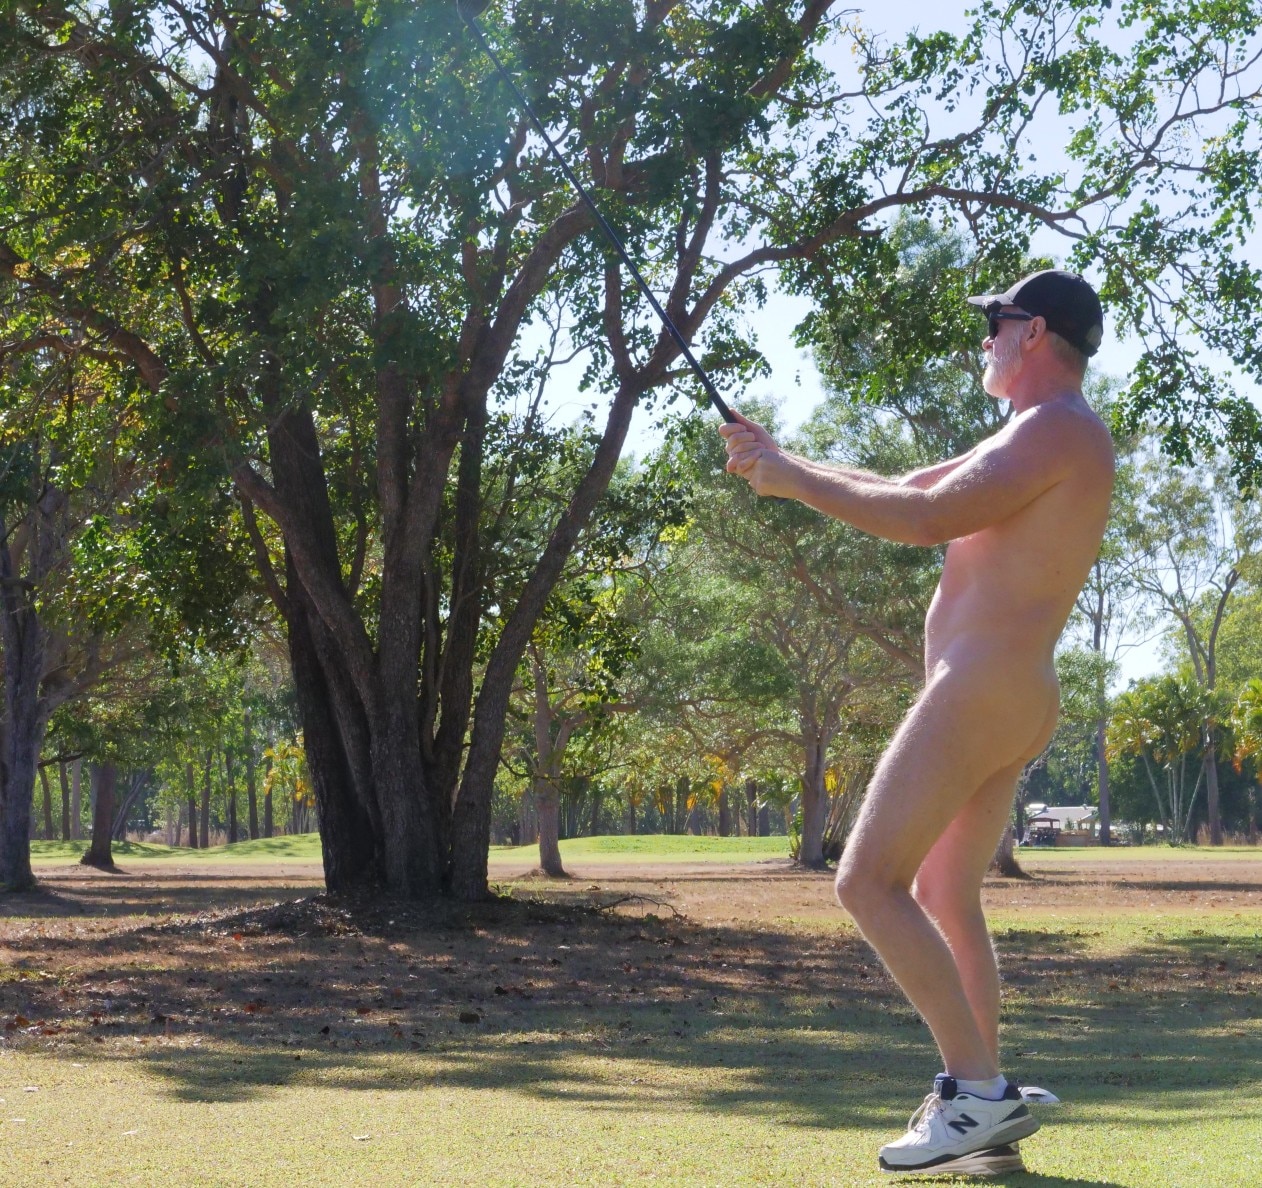 Naturists celebrate body positivity with nude golf, despite record low Darwin temperatures